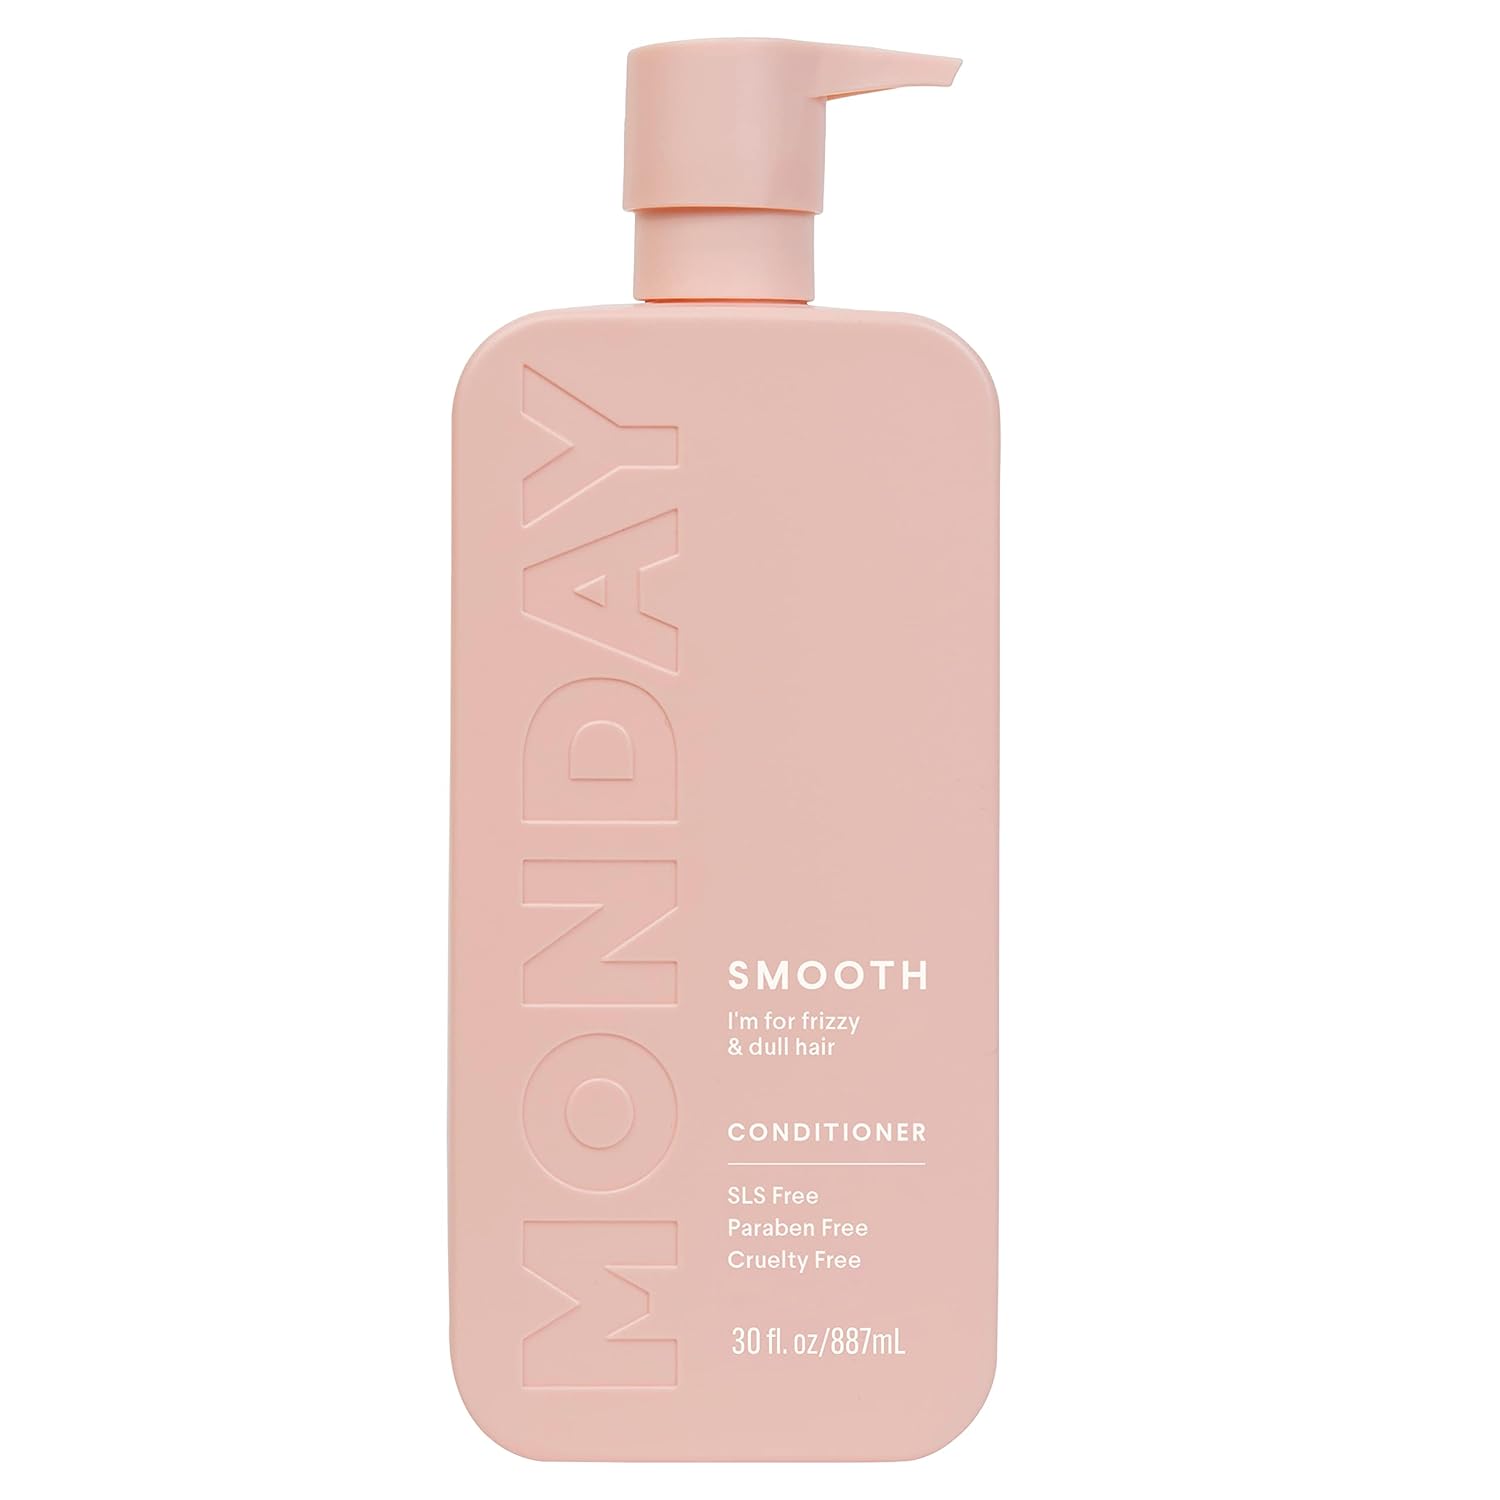 MONDAY HAIRCARE Smooth Conditioner Review